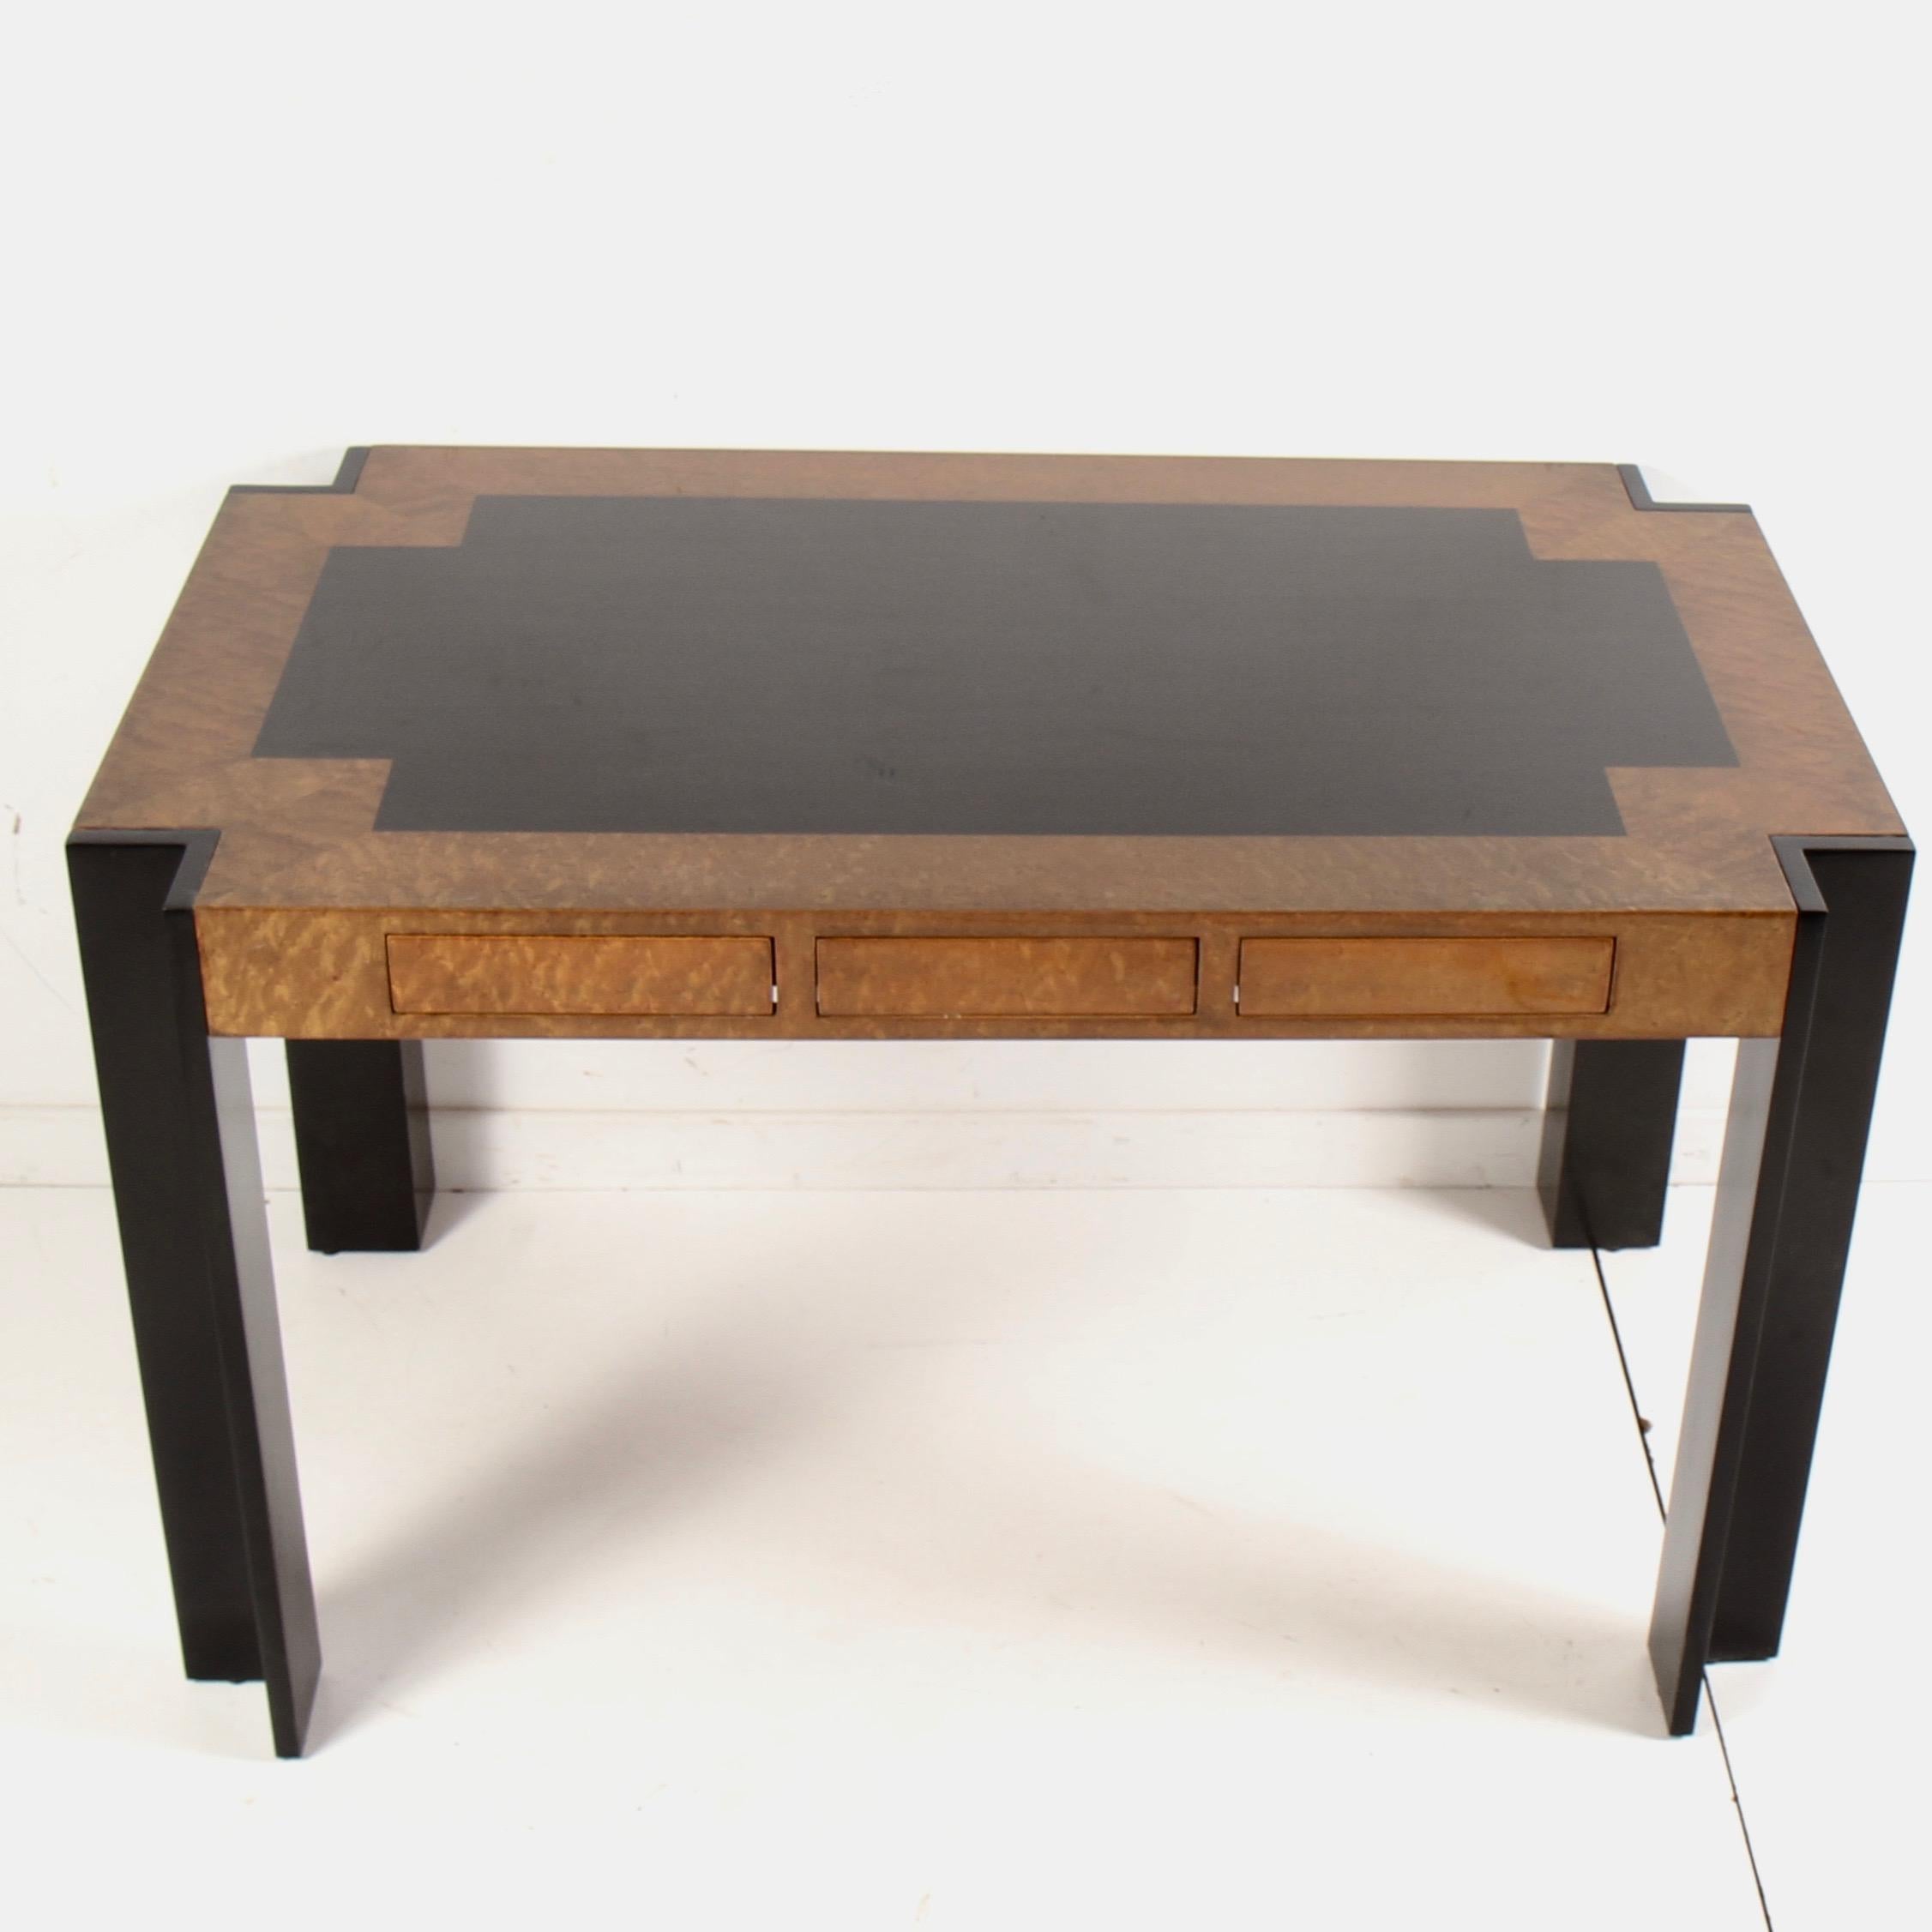 Leon Rosen designed desk for The Pace collection with contrasting ebony and burl veneers. Three center drawers are spring loaded and open with just a touch. Just refinished in slightly darker than original finish.